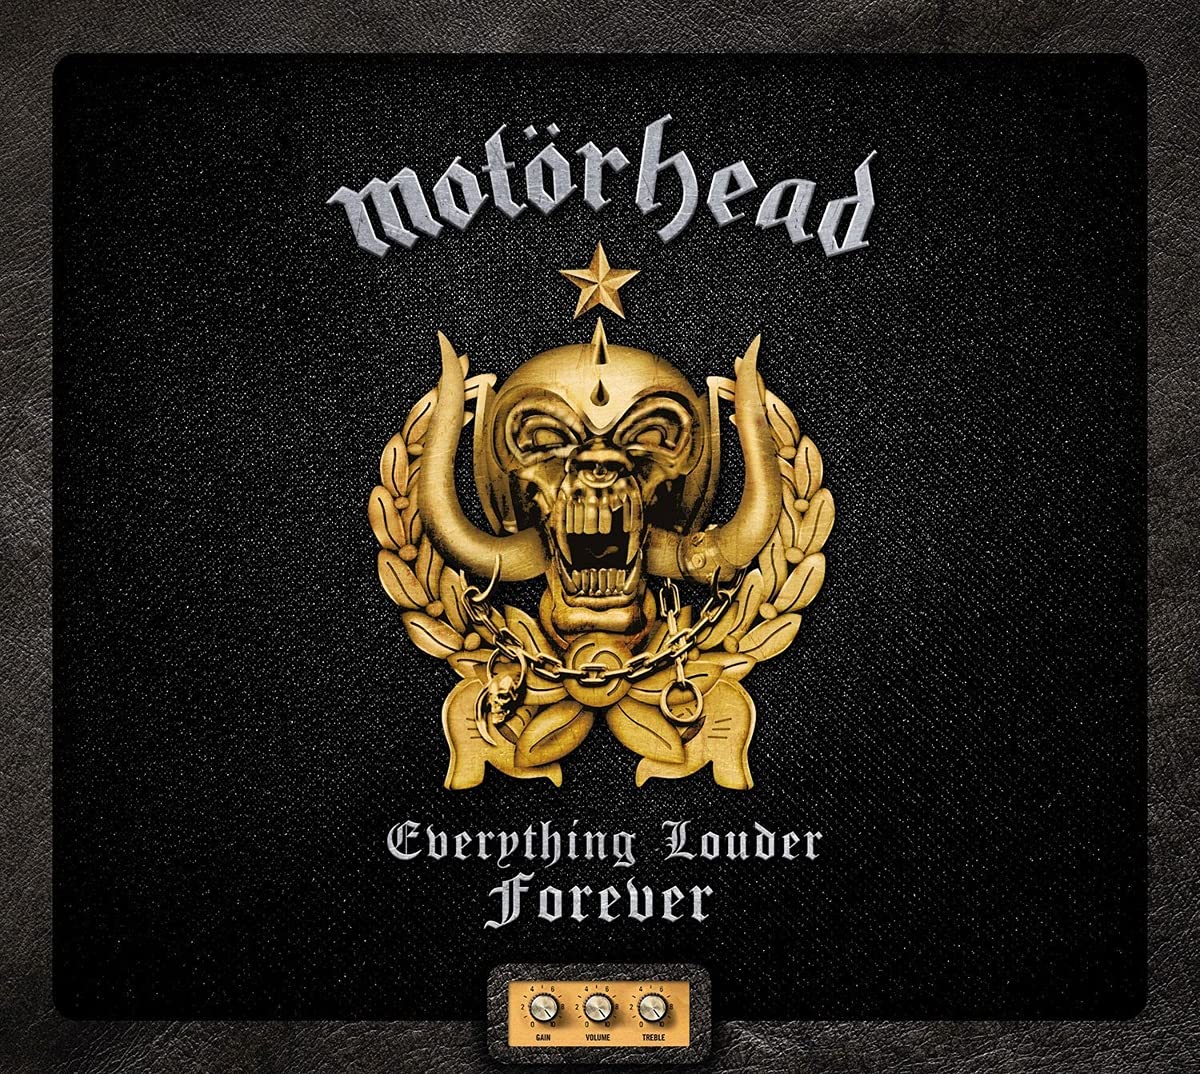 Motörhead - Everything Louder Forever (2021) [FLAC] Download